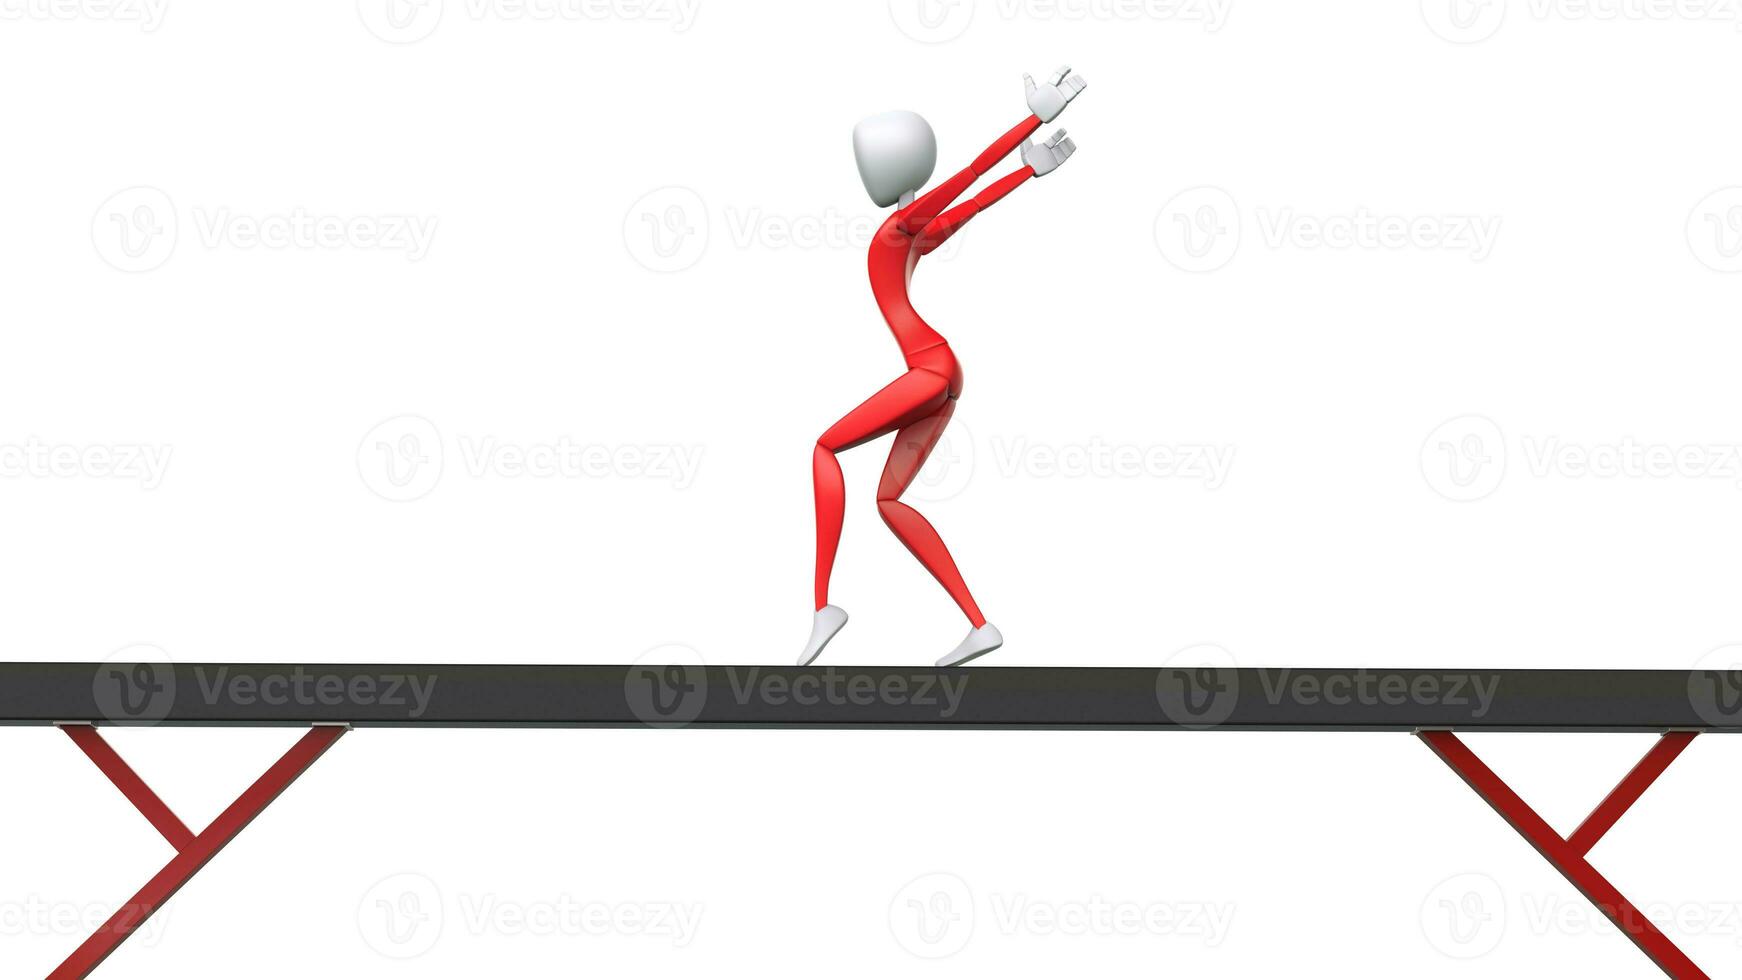 Olympic gymnast in red outfit - balance beam routine - 3D Illustration photo